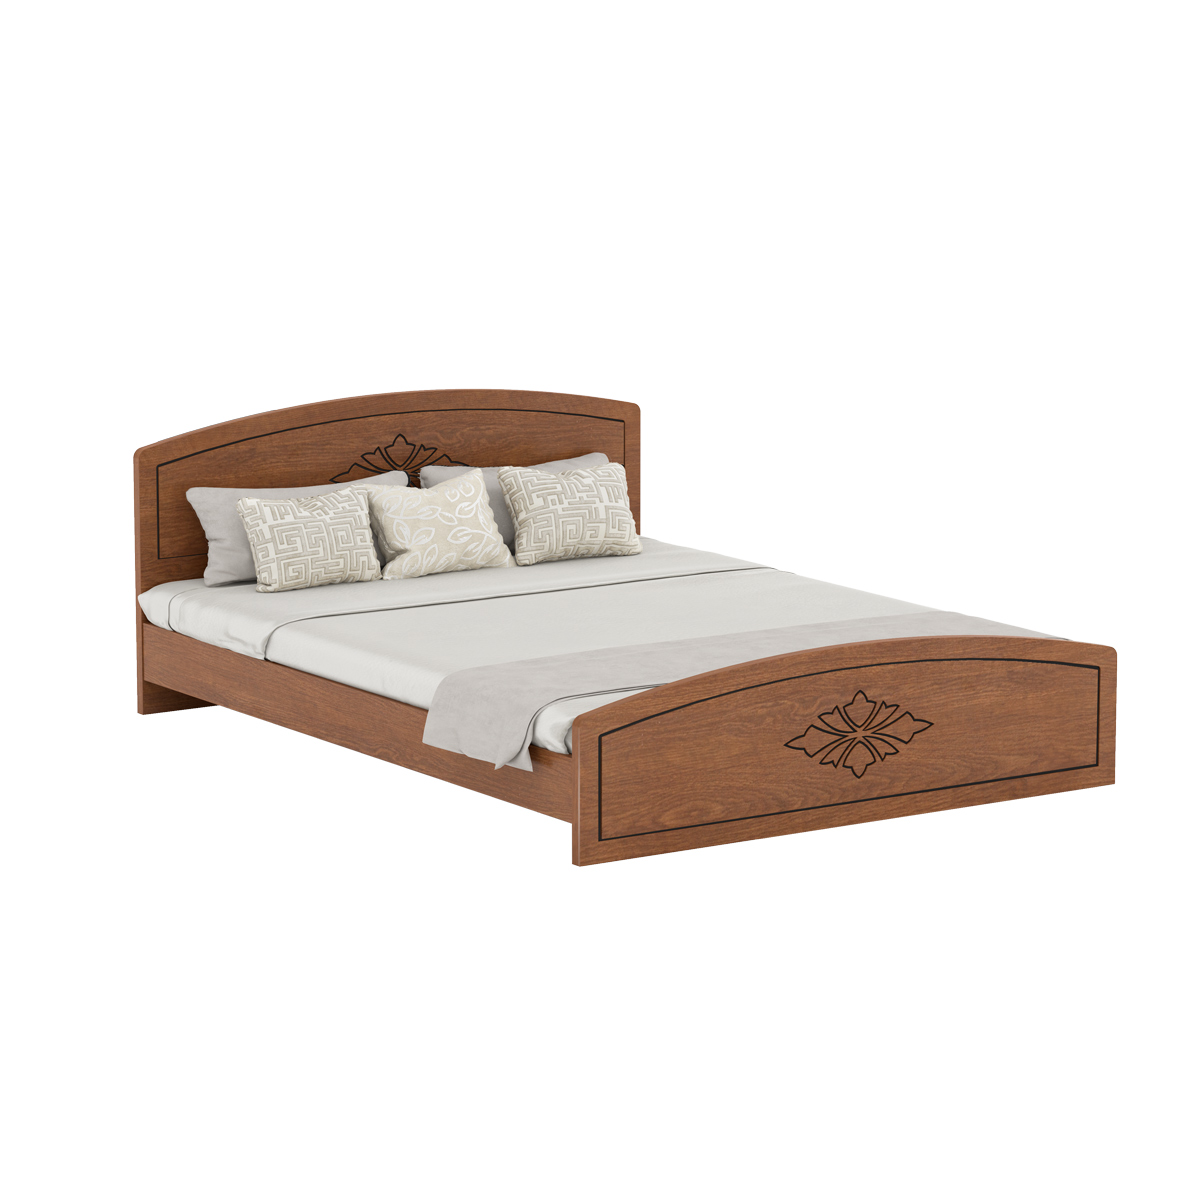 Sizzling Bed Bdh-121